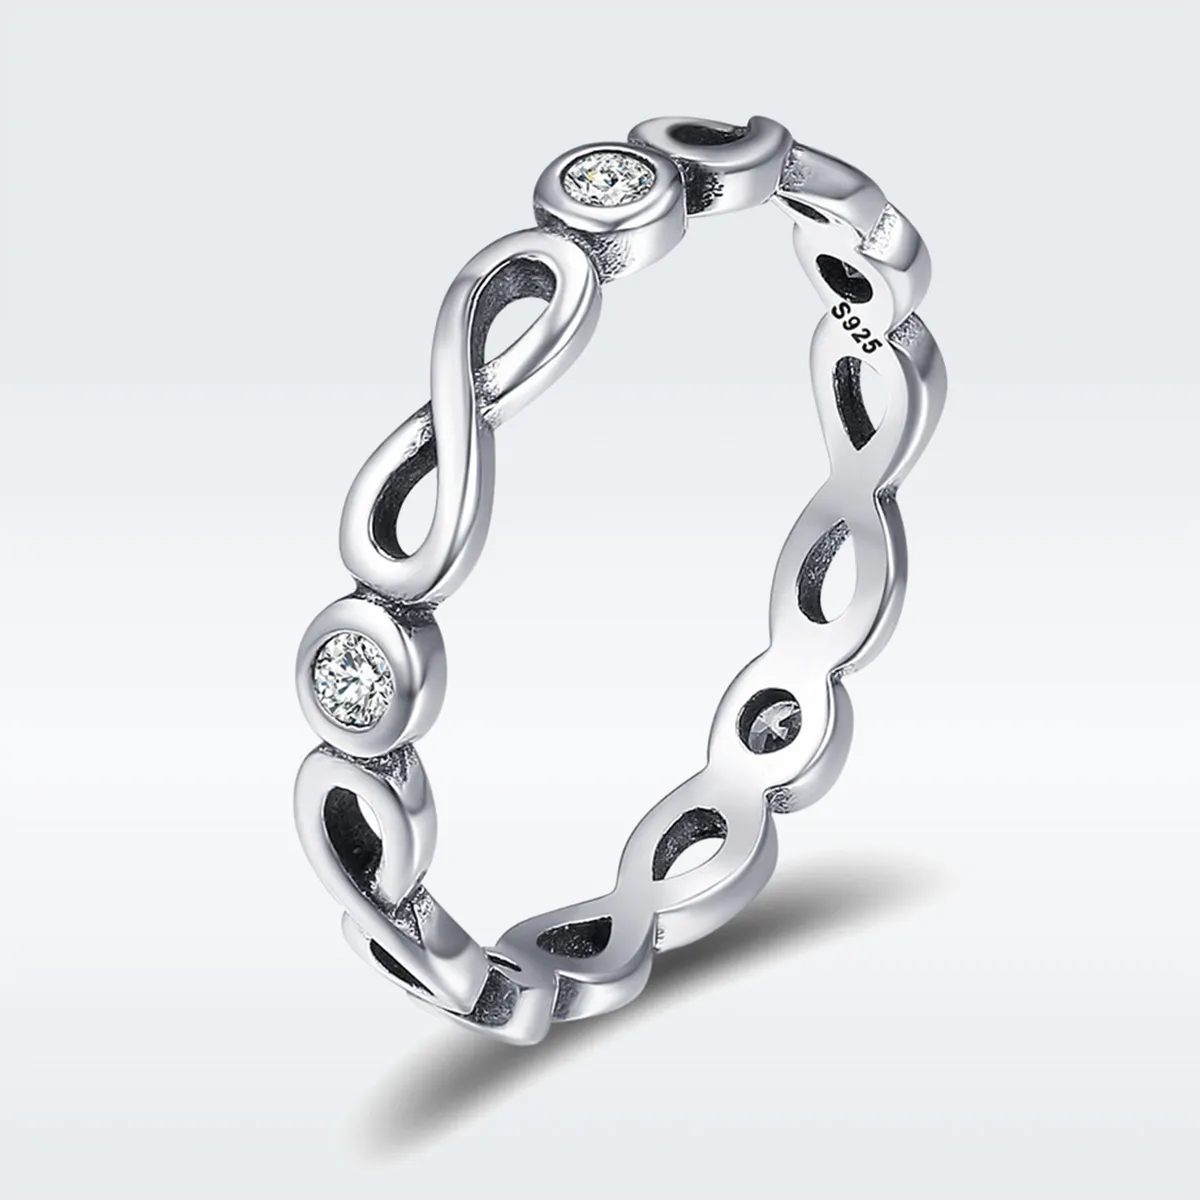 Pandora Style Silver Infinite Blessing Ring - SCR181